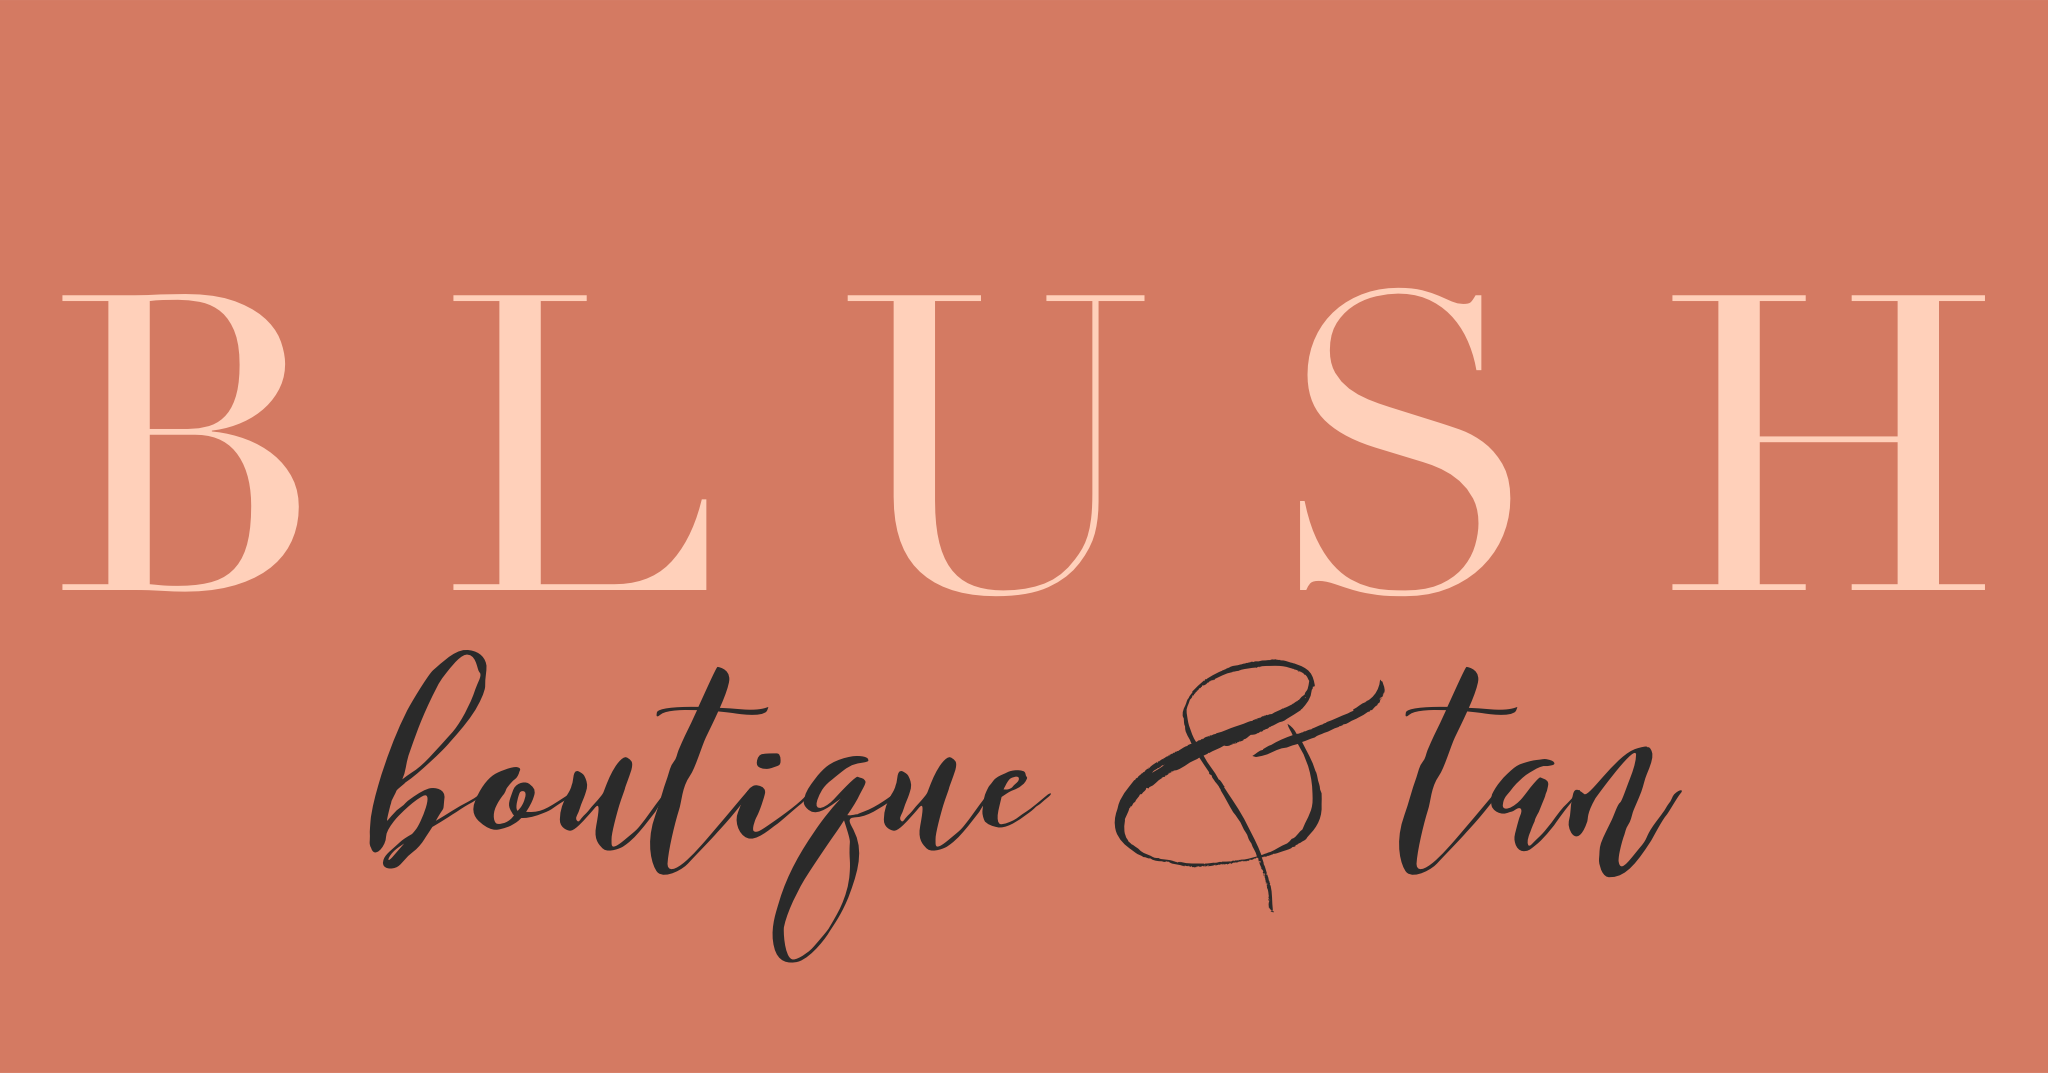 Blush Boutique and Tan